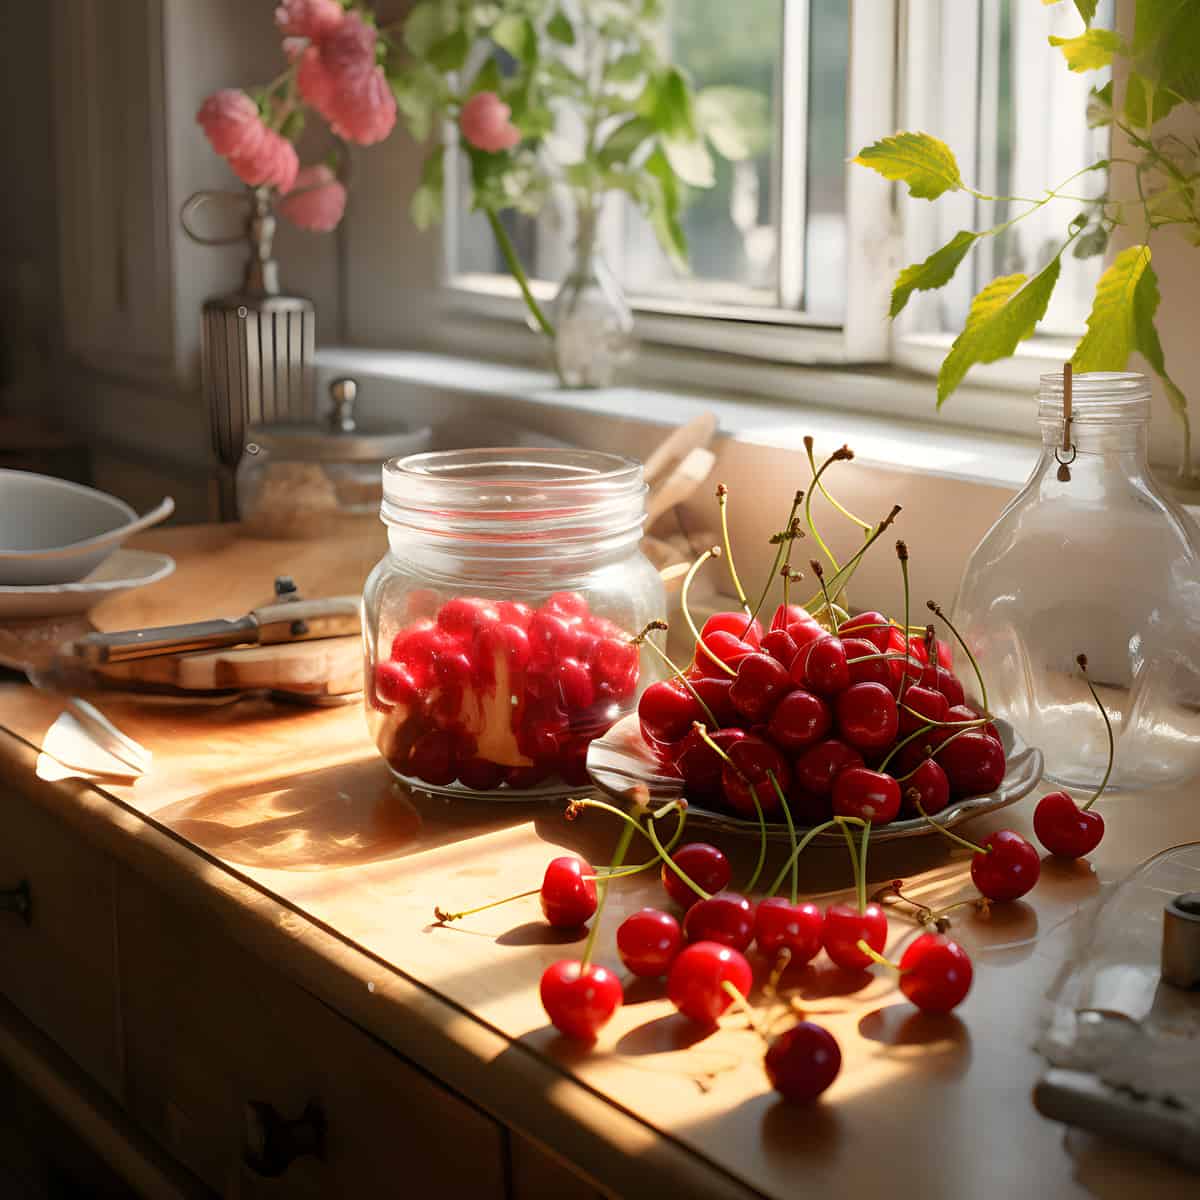 Sour Cherries on a kitchen counter